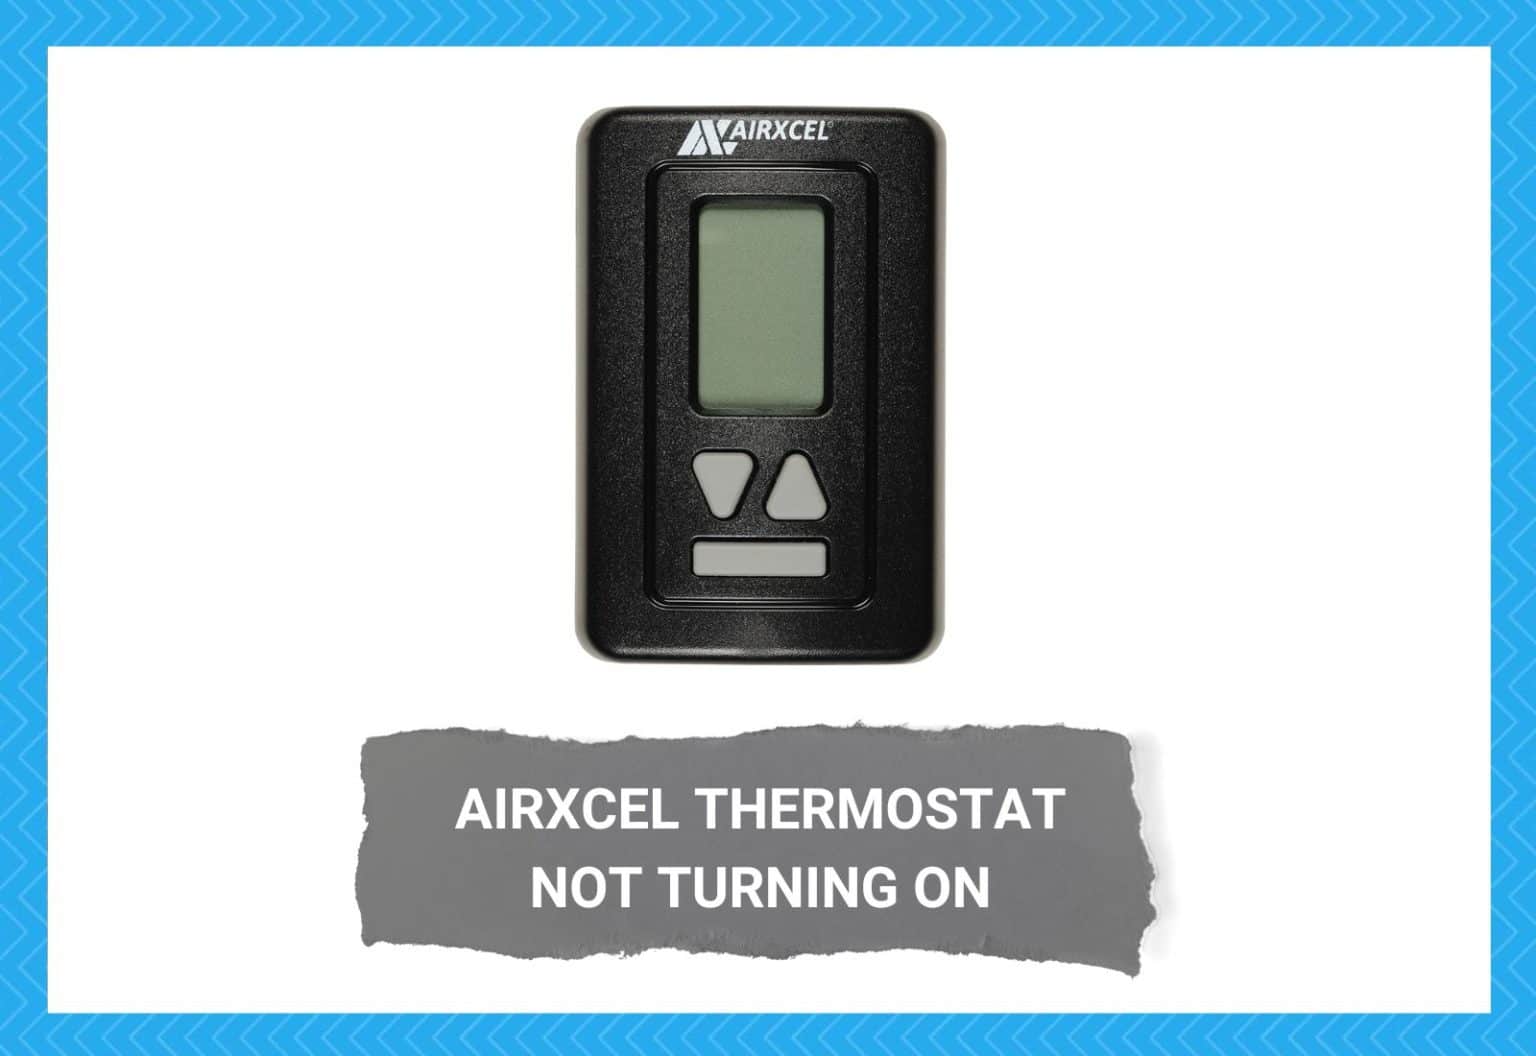 4-solutions-for-airxcel-thermostat-not-turning-on-camper-upgrade